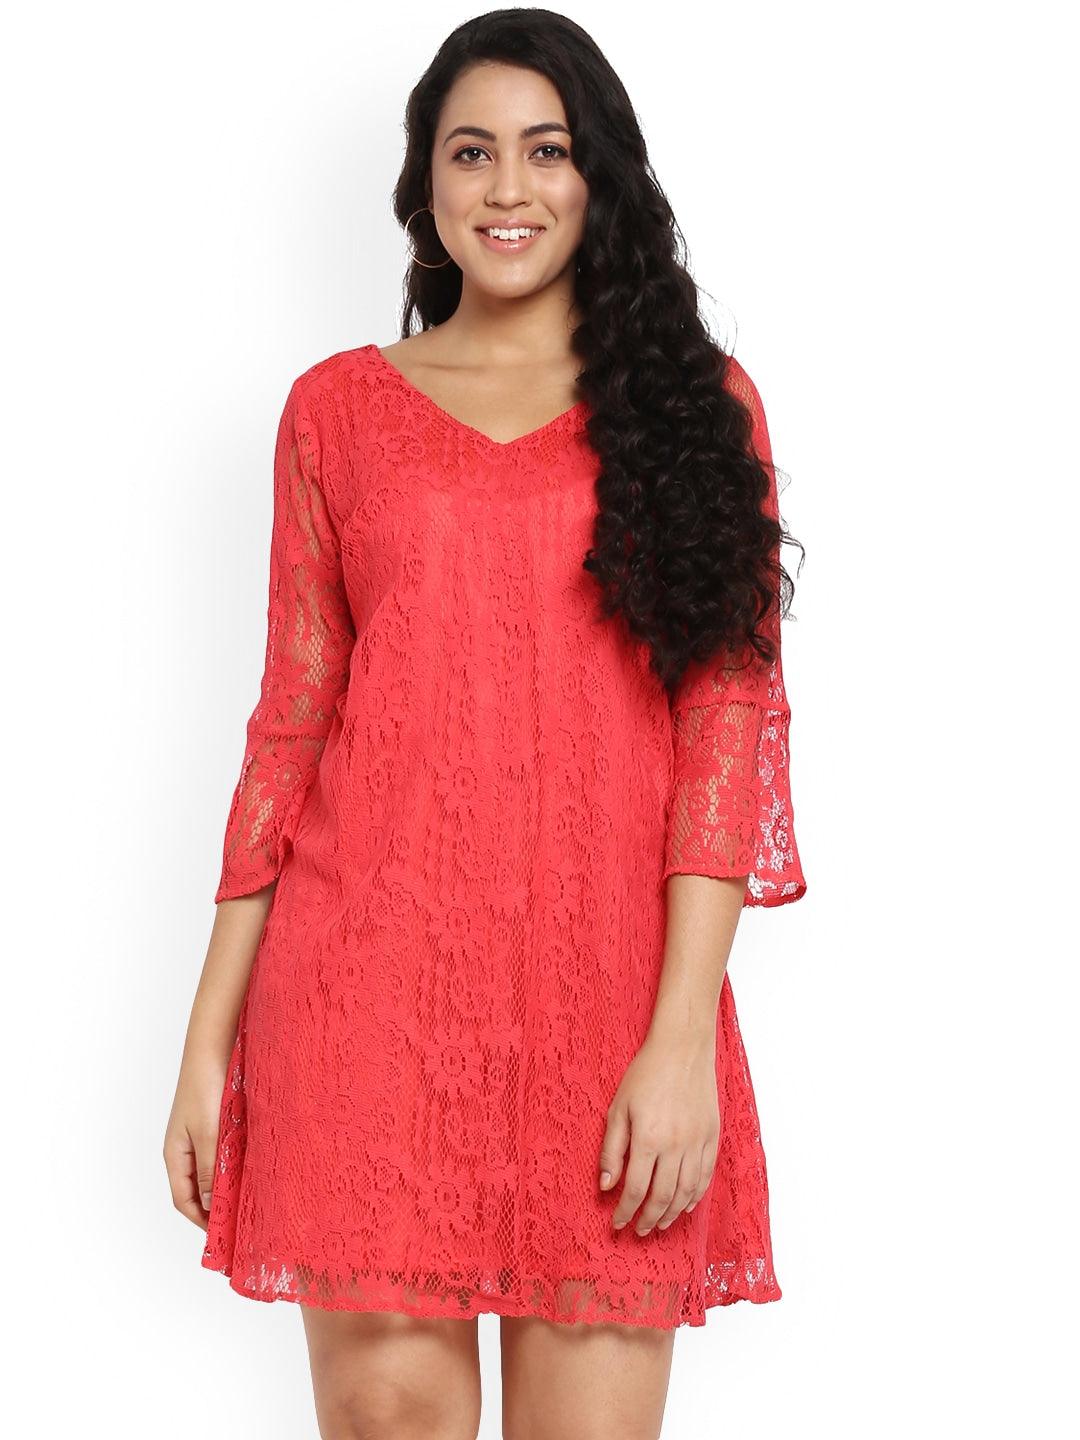 Qurvii Cherry Red Lace A-linee Dress - Qurvii India